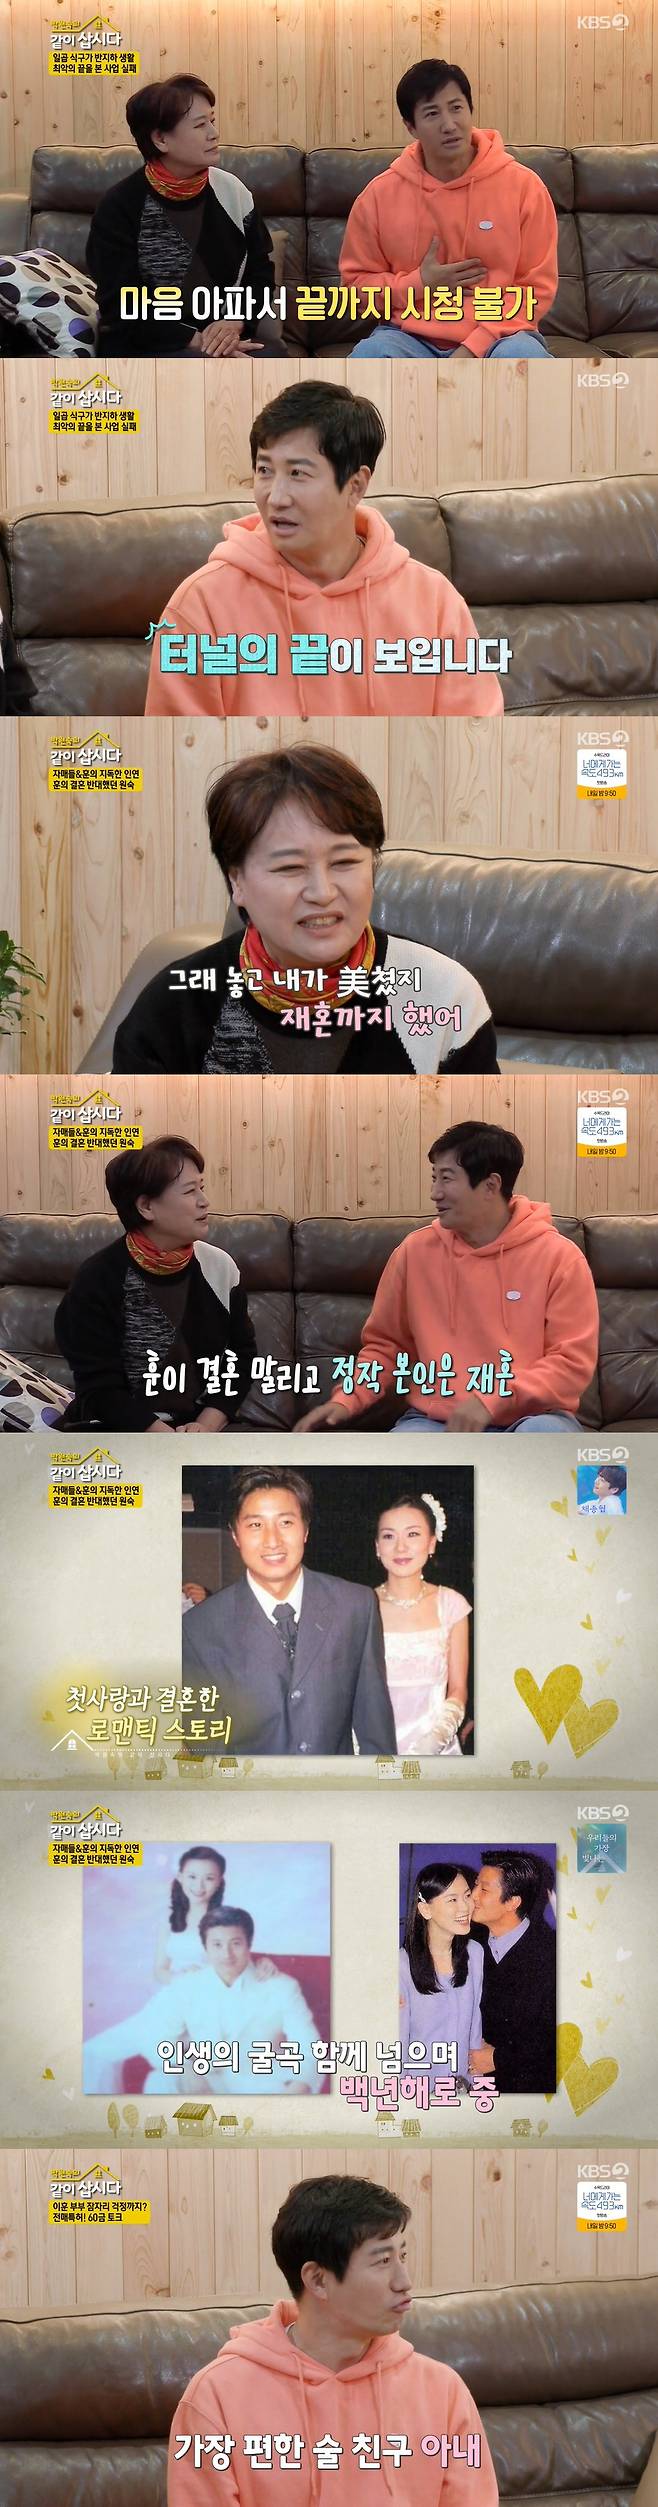 I recalled the days when Actor Lee Hoon was struggling with business failures.On the 19th KBS 2TV Lets Live With Park Won-sook Season 3, Park Won-sook, Hye Eun Yi, Kim chung-ui, who moved to a new house, were drawn.Lee Hoon appeared in a new house with Park Won-sook, Hye Eun Yi and Kim Chung.The three people who saw Lee Hoon were prettier than before, and Lee Hoon said, I took a bubble, I lost 10kg.Park Won-sook welcomed Lee Hoon but looked worriedly at him, saying, But youre not divorced?Lee Hoon then replied, Did you not hear me? And Park Won-sook was sorry for why did you do it?Park Won-sook, who thought Lee Hoon was divorced, continued to worry, Why are you divorced? So Lee Hoon said, Im joking, Im living well.I came here because I needed a worker because my seniors moved in. Lee Hoon, who is 50 this year, said: My first son is 21 and my second son is a high one; the kids are taller than me, along with photos of Lee Hoons two sons were released.The appearance of two sons who boasted a beautiful visual like their father was warm.Lee Hoon said, I thought the most important thing for a man was to name his two sons righteousness, but the second name was Iri.So I made it friendship, he said. But I do not like the children because their names are too rustic.Park Won-sook said carefully, I learned through the broadcast that you were having a hard time.Lee Hoon recalled that he had failed to do business 10 years ago and owed 3 billion won, saying, It was a lot of hard work. I was kicked out of my house and lived in a ring room.I did not know, but after a while my wife and children had a lot of hardships. I thought it was hard for me, so I could not be friendly to my wife.I was so angry when I came home after drinking because it was hard to fail in business. I thought that I had overcome it after that, and my wife and children had a lot of trouble. Lee Hoon smiled, But now I see the end of the tunnel, I did not see it in the dark, but after 10 years I see it now.I can see the end now, said Hye Eun Yi, who felt Lee Hoons feelings.Park Won-sook said, Dont do some business, and Lee Hoon was real, and he was deeply sympathetic.Lee Hoon also recalled his relationship with his son, Park Won-sook, who died.He went to the store where Park Won-sooks son was running and drank and played frequently. At that time, I think my brother told my teacher that he had been drinking with Hoon.So the teacher called me directly and said, Enough drinking X, and Park Won-sook laughed, There is no memory.I did and (heard the news) Chest was so sick, so I cant watch (the broadcast) without tears, Lee Hoon said.Lee Hoon, who had a relationship with Park Won-sook through a past work, said, I marriage shortly after the drama.At that time, I told him that he was marriage, and he said, Why do not you do that? Park Won-sook, who heard this, laughed, saying, I was crazy, I was married again. I do not think human thoughts.Lee Hoon, who marriages his wife when she was 27 years old after eight years of love with his first love, replied, My wife is the most comfortable drink friend now.Before you sleep, you drink a bottle of shochu, mainly talking about your son, drinking, and then sleeping, he said.